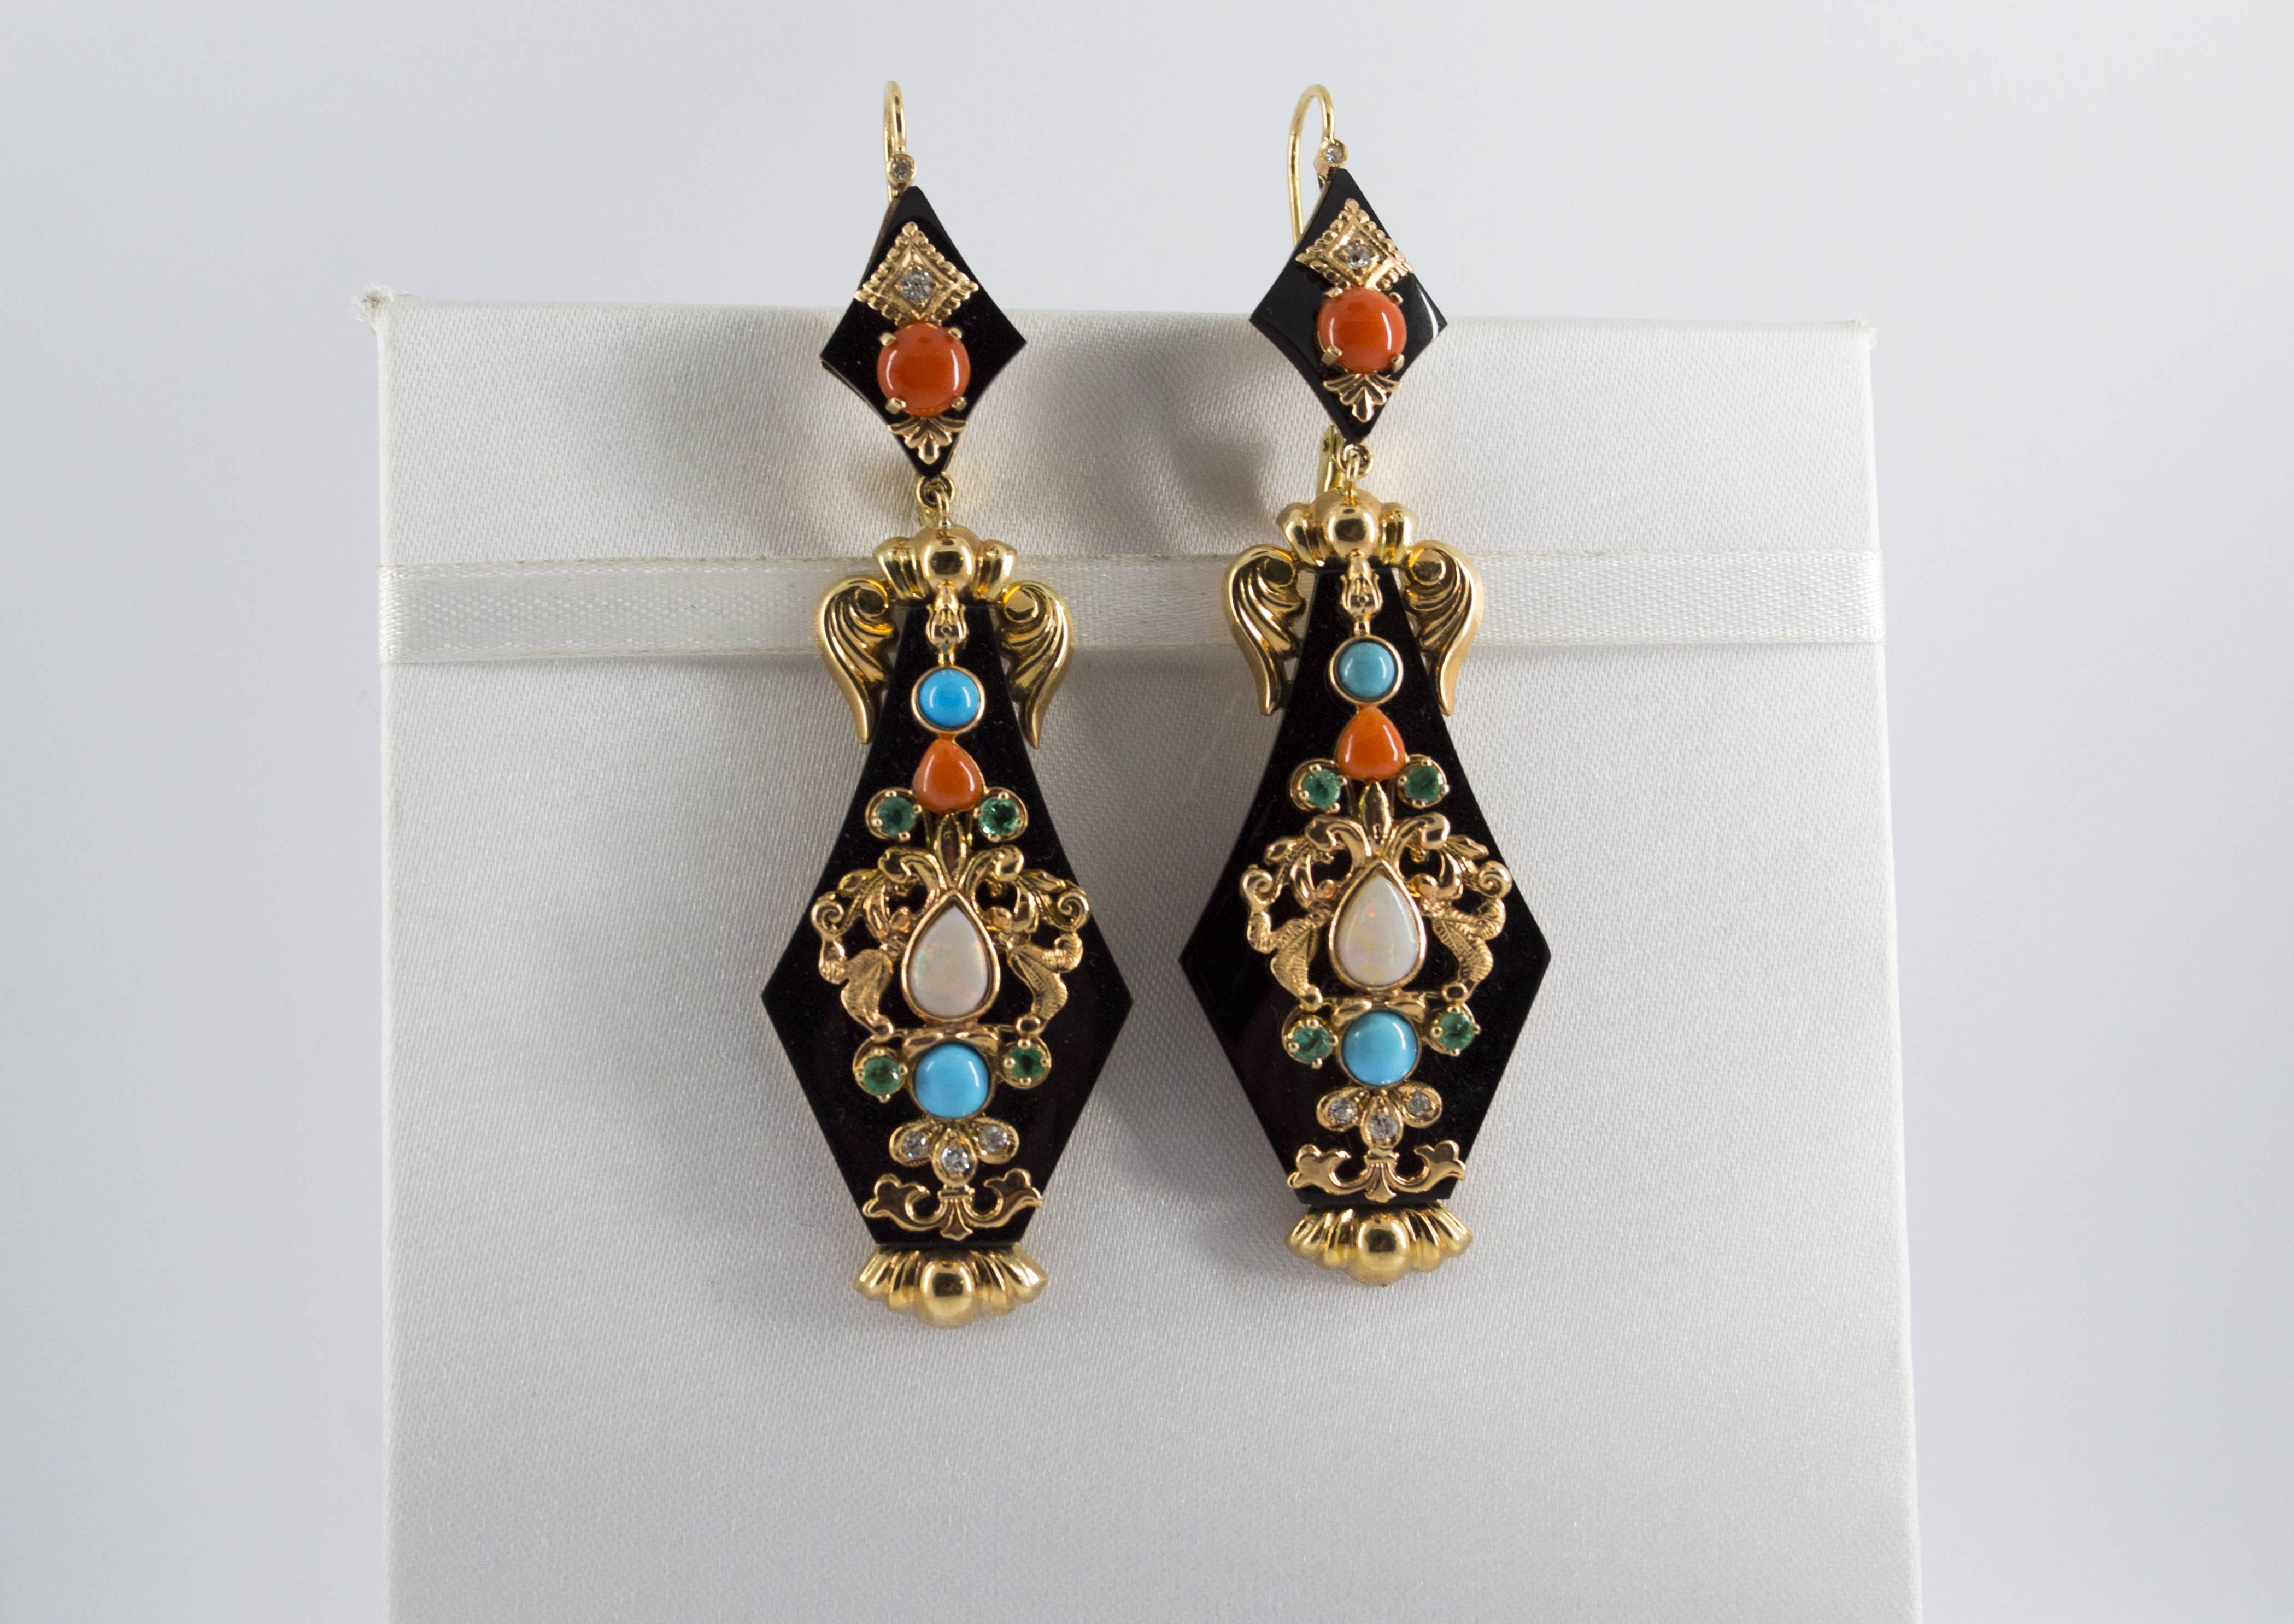 These Earrings are made of 14K Yellow Gold.
These Earrings have 0.40 Carats of White Diamonds.
These Earrings have 0.20 Carats of Emeralds.
These Earrings have also Onyx, Turquoise, Red Coral, Opal.
All our Earrings have pins for pierced ears but we